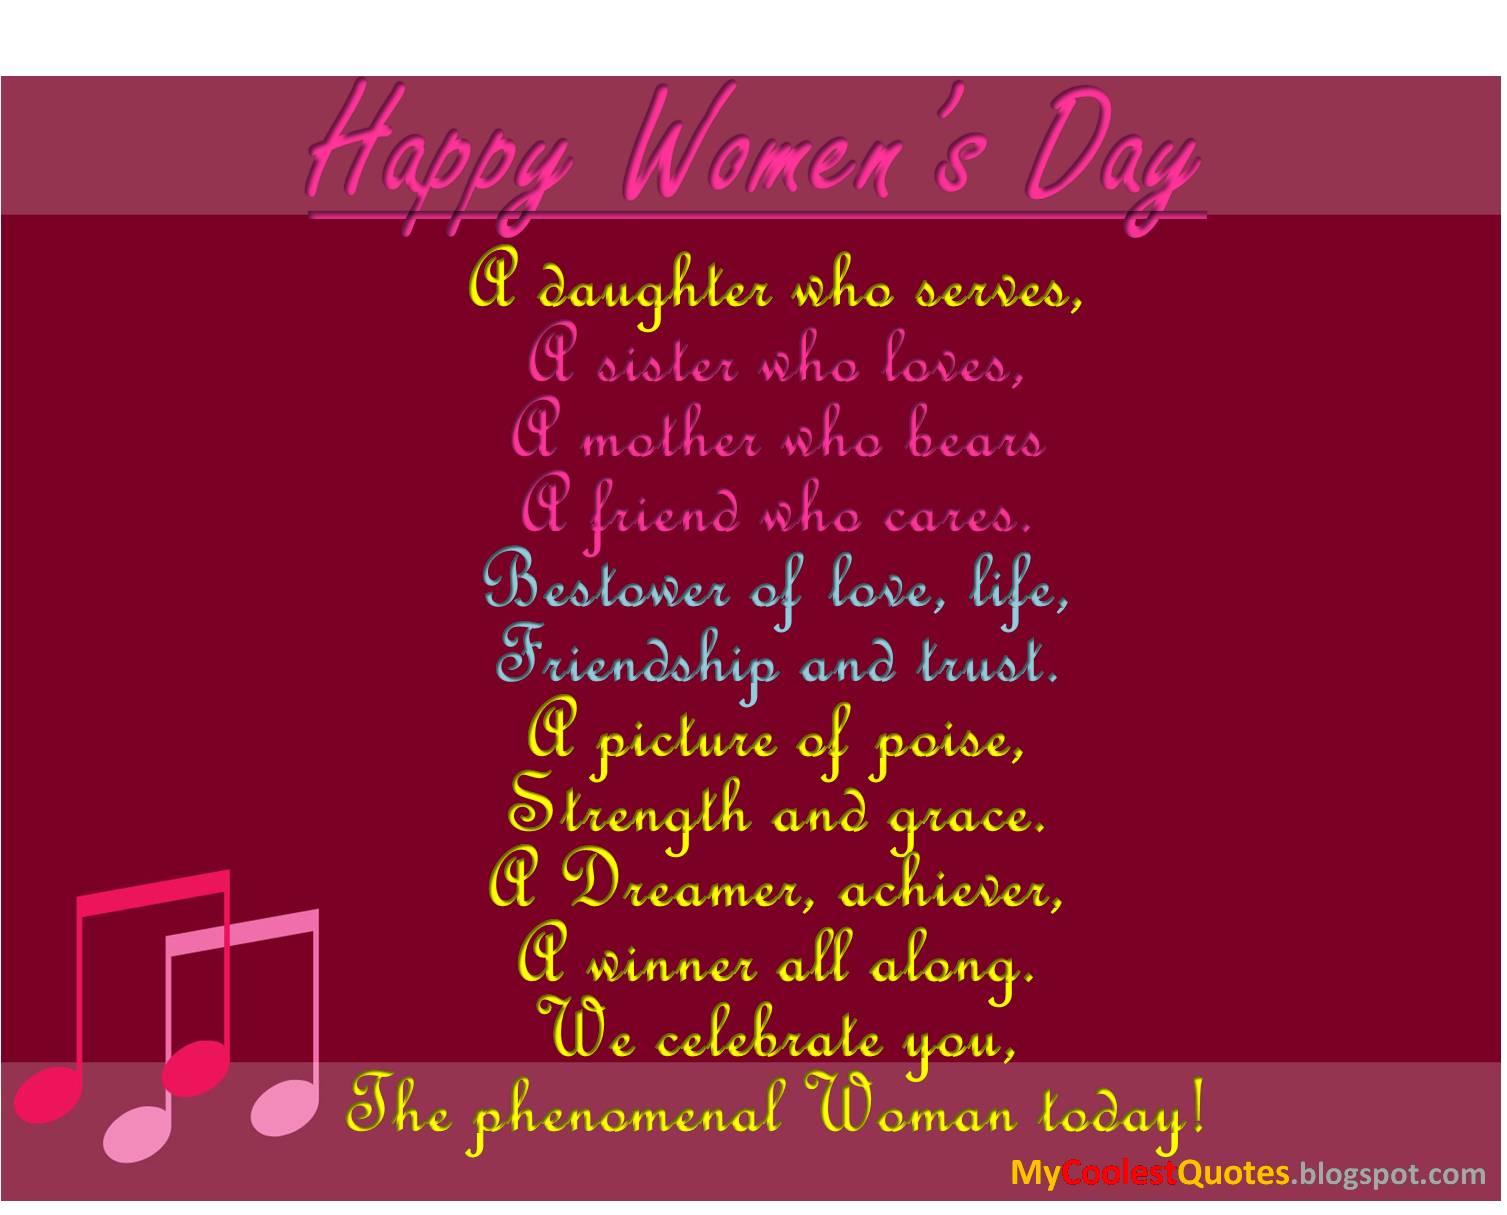 Happy International Womens Day Quotes. QuotesGram